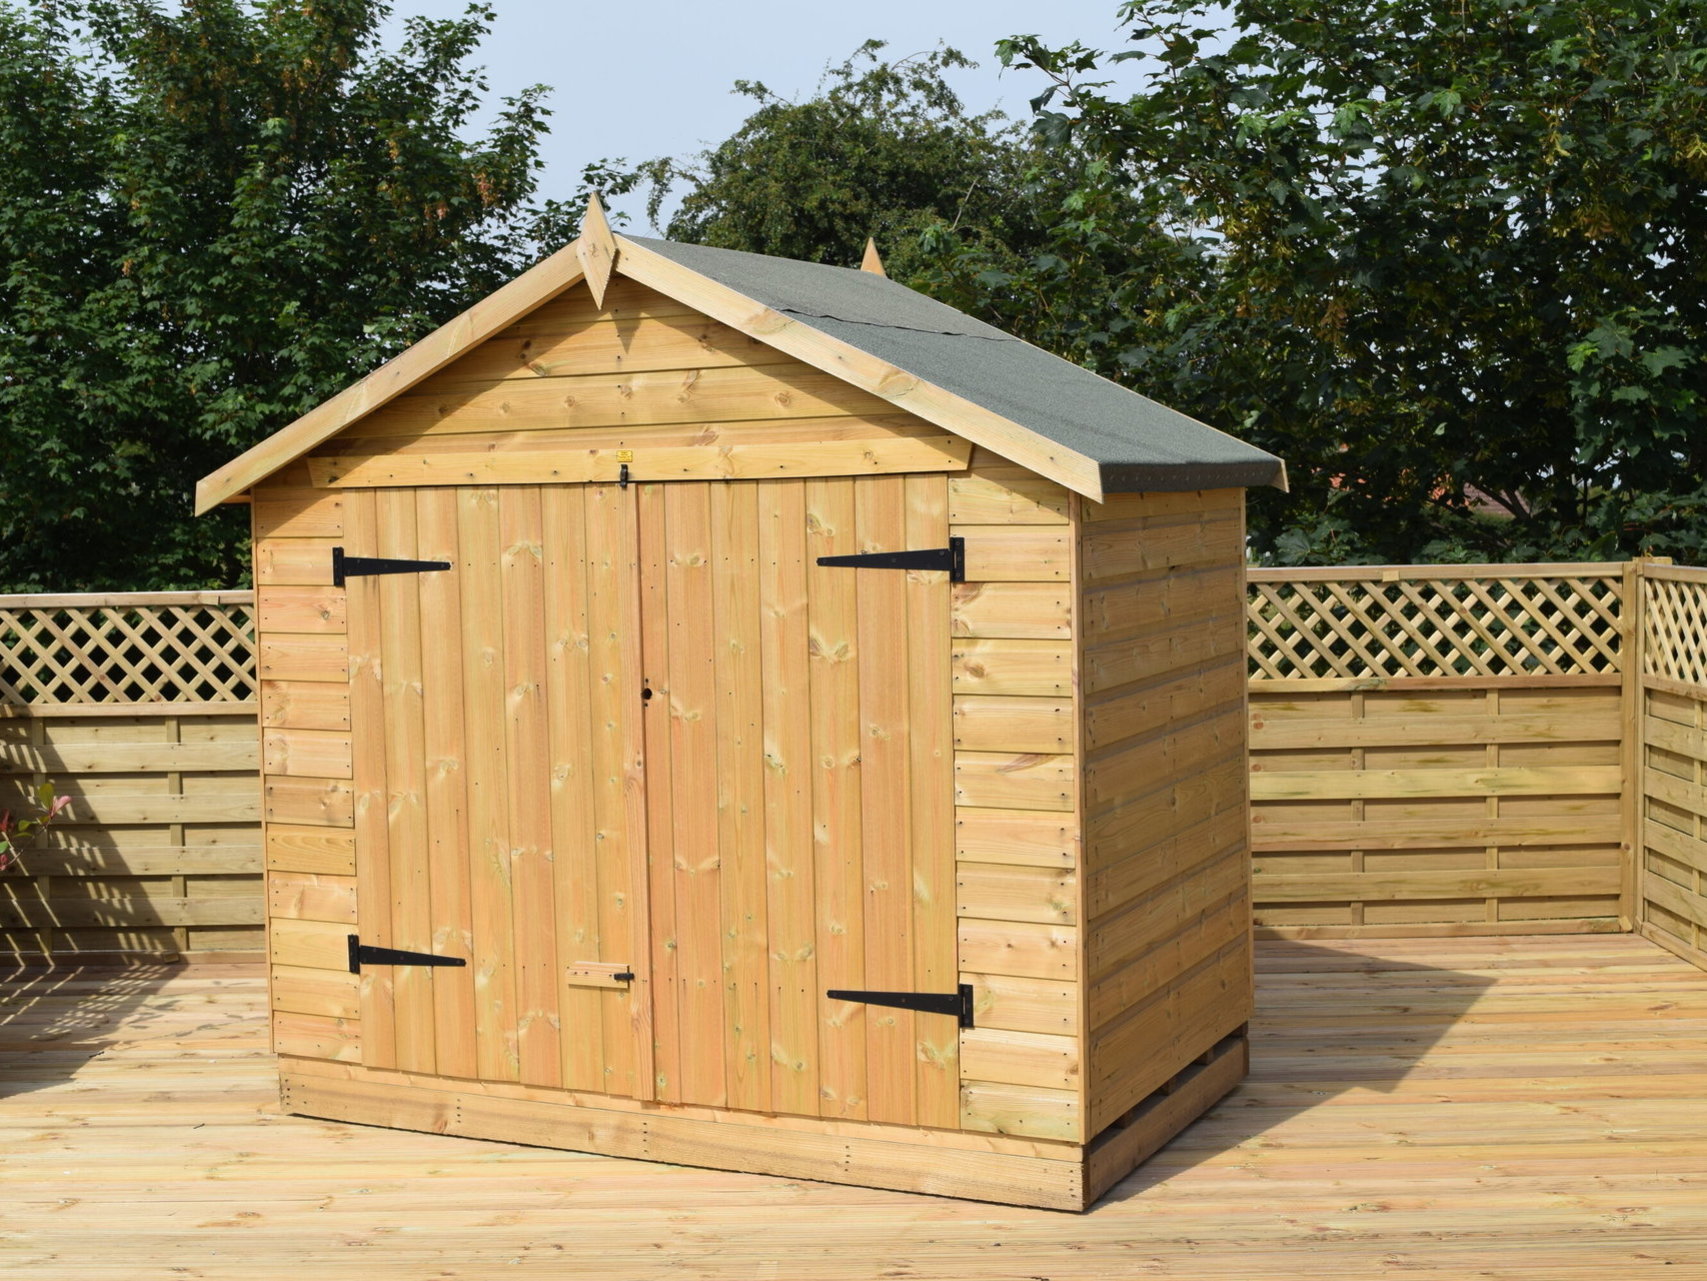 A shed on decking